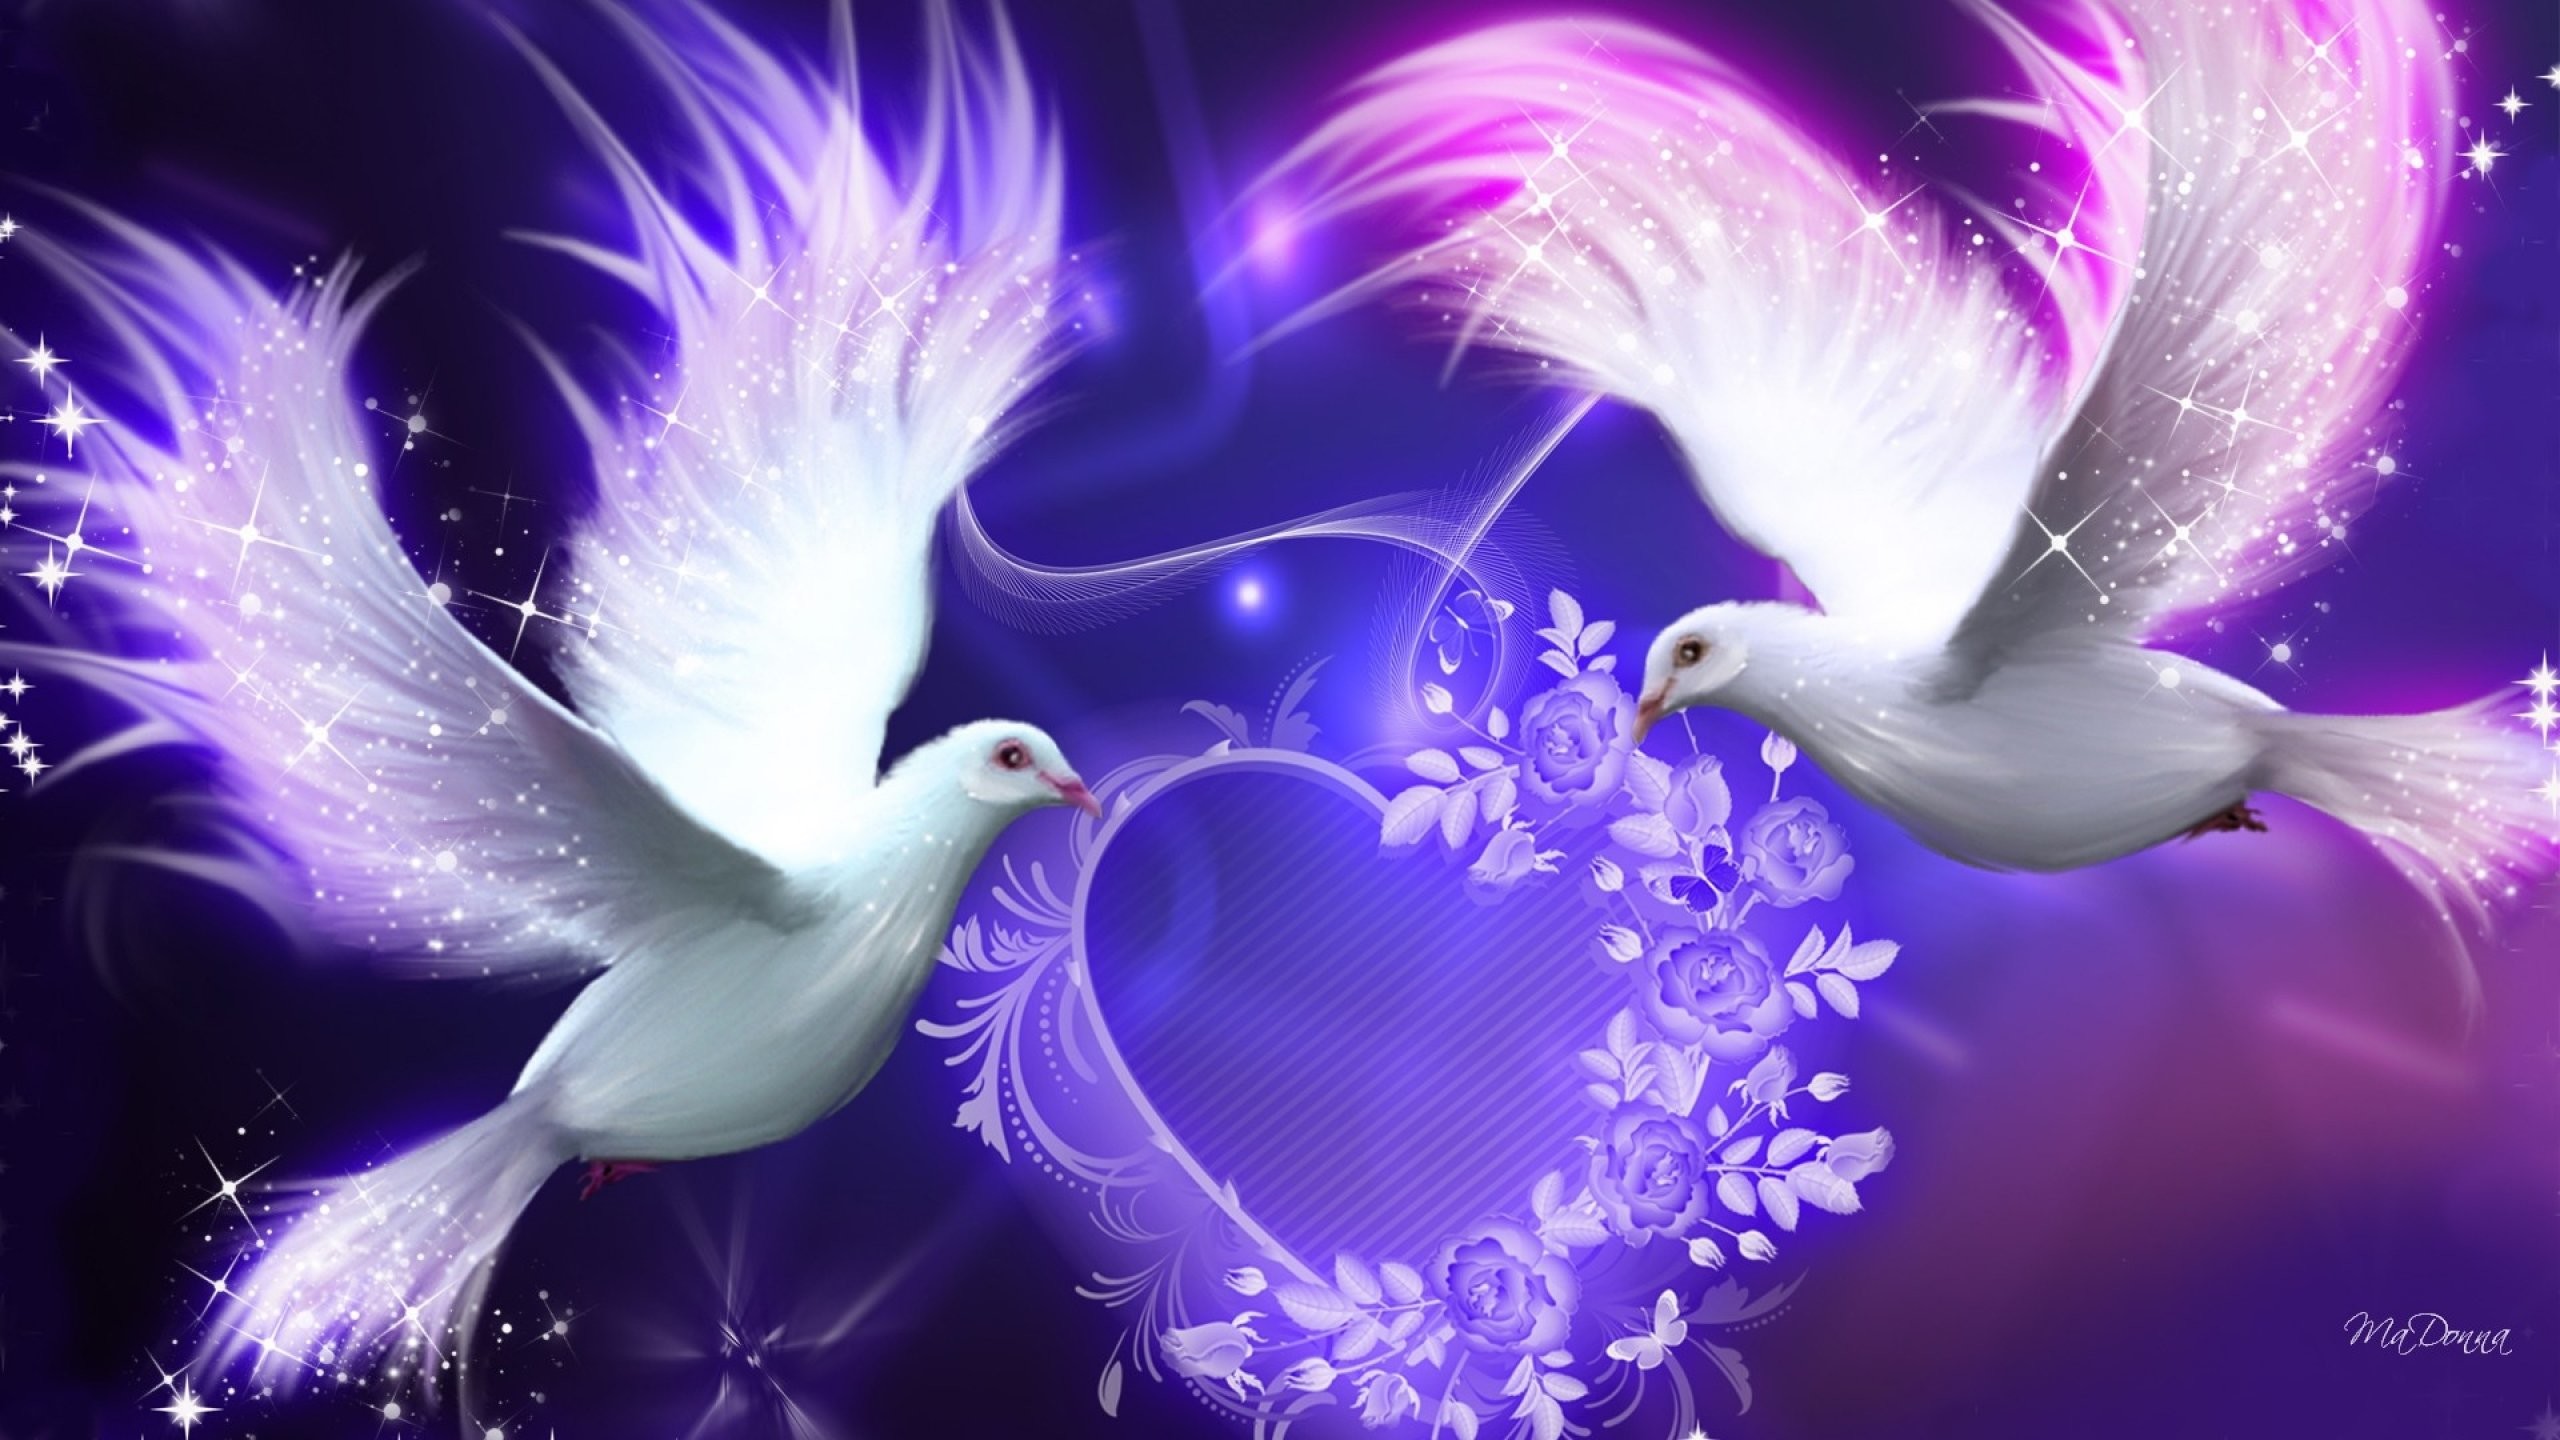 2560x1440 nature animals birds wallpapers hd desktop and mobile backgrounds; purple  doves 653300 walldevil ...